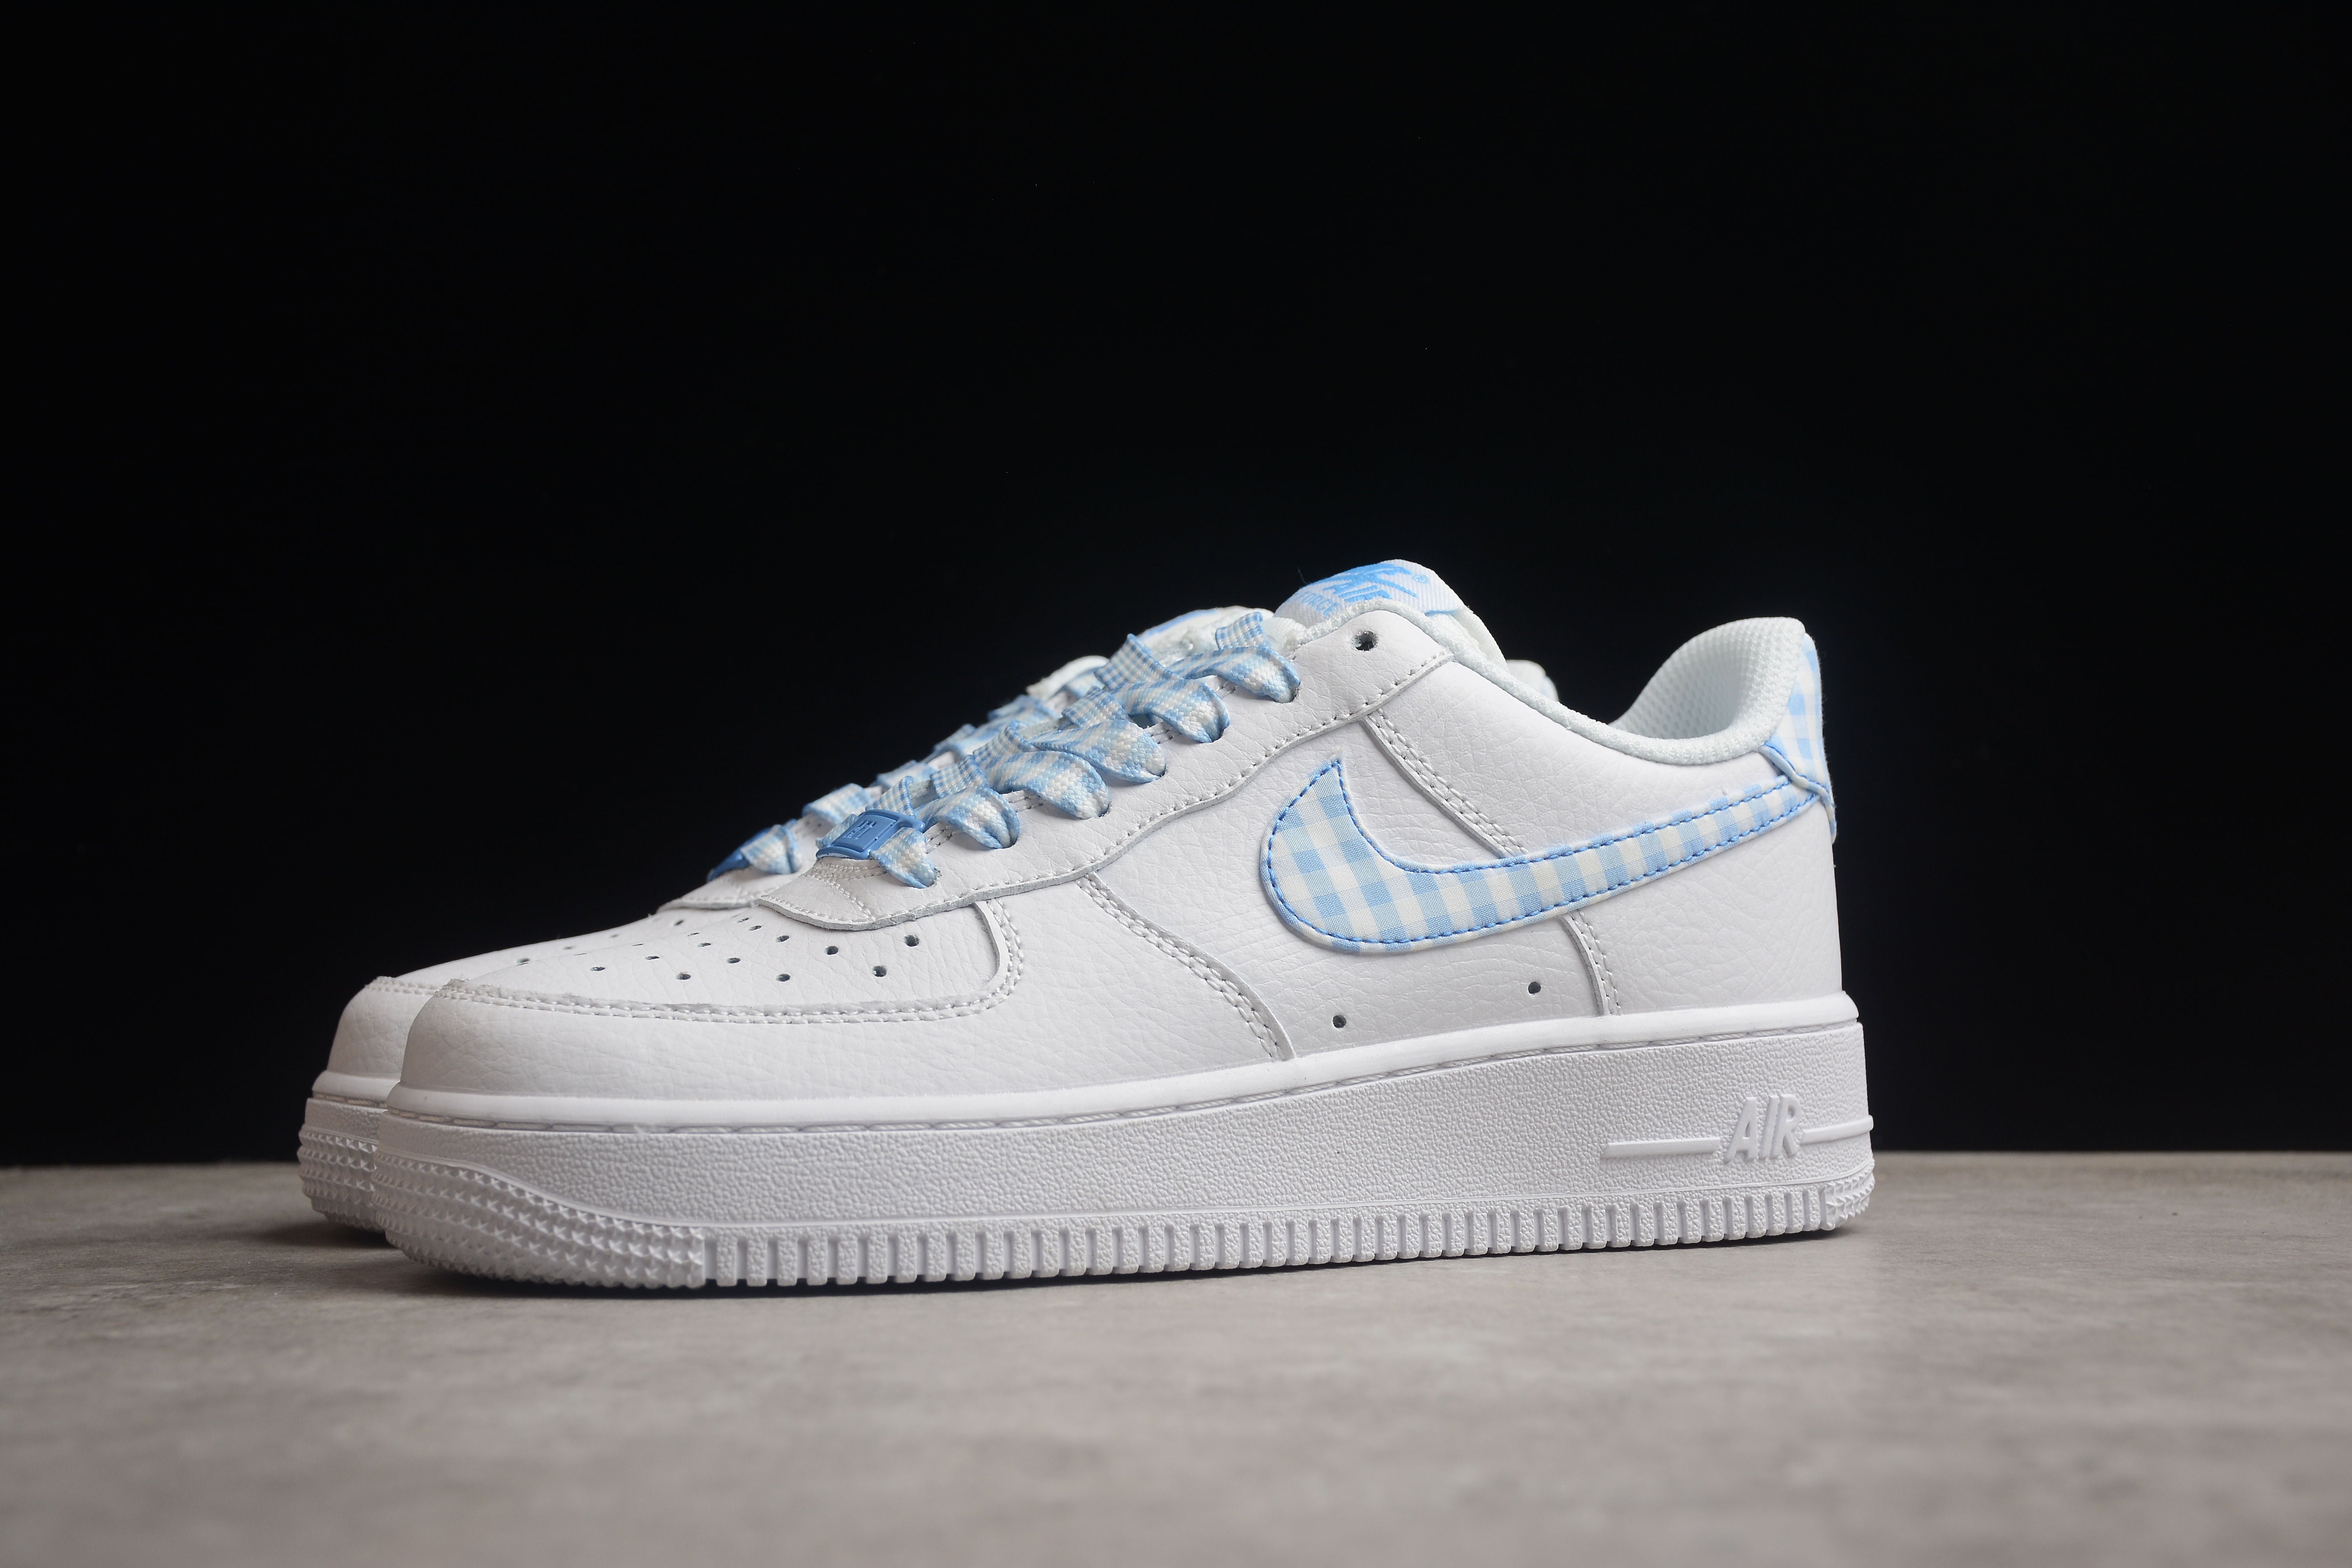 Nike airforce A1 blue squares shoes